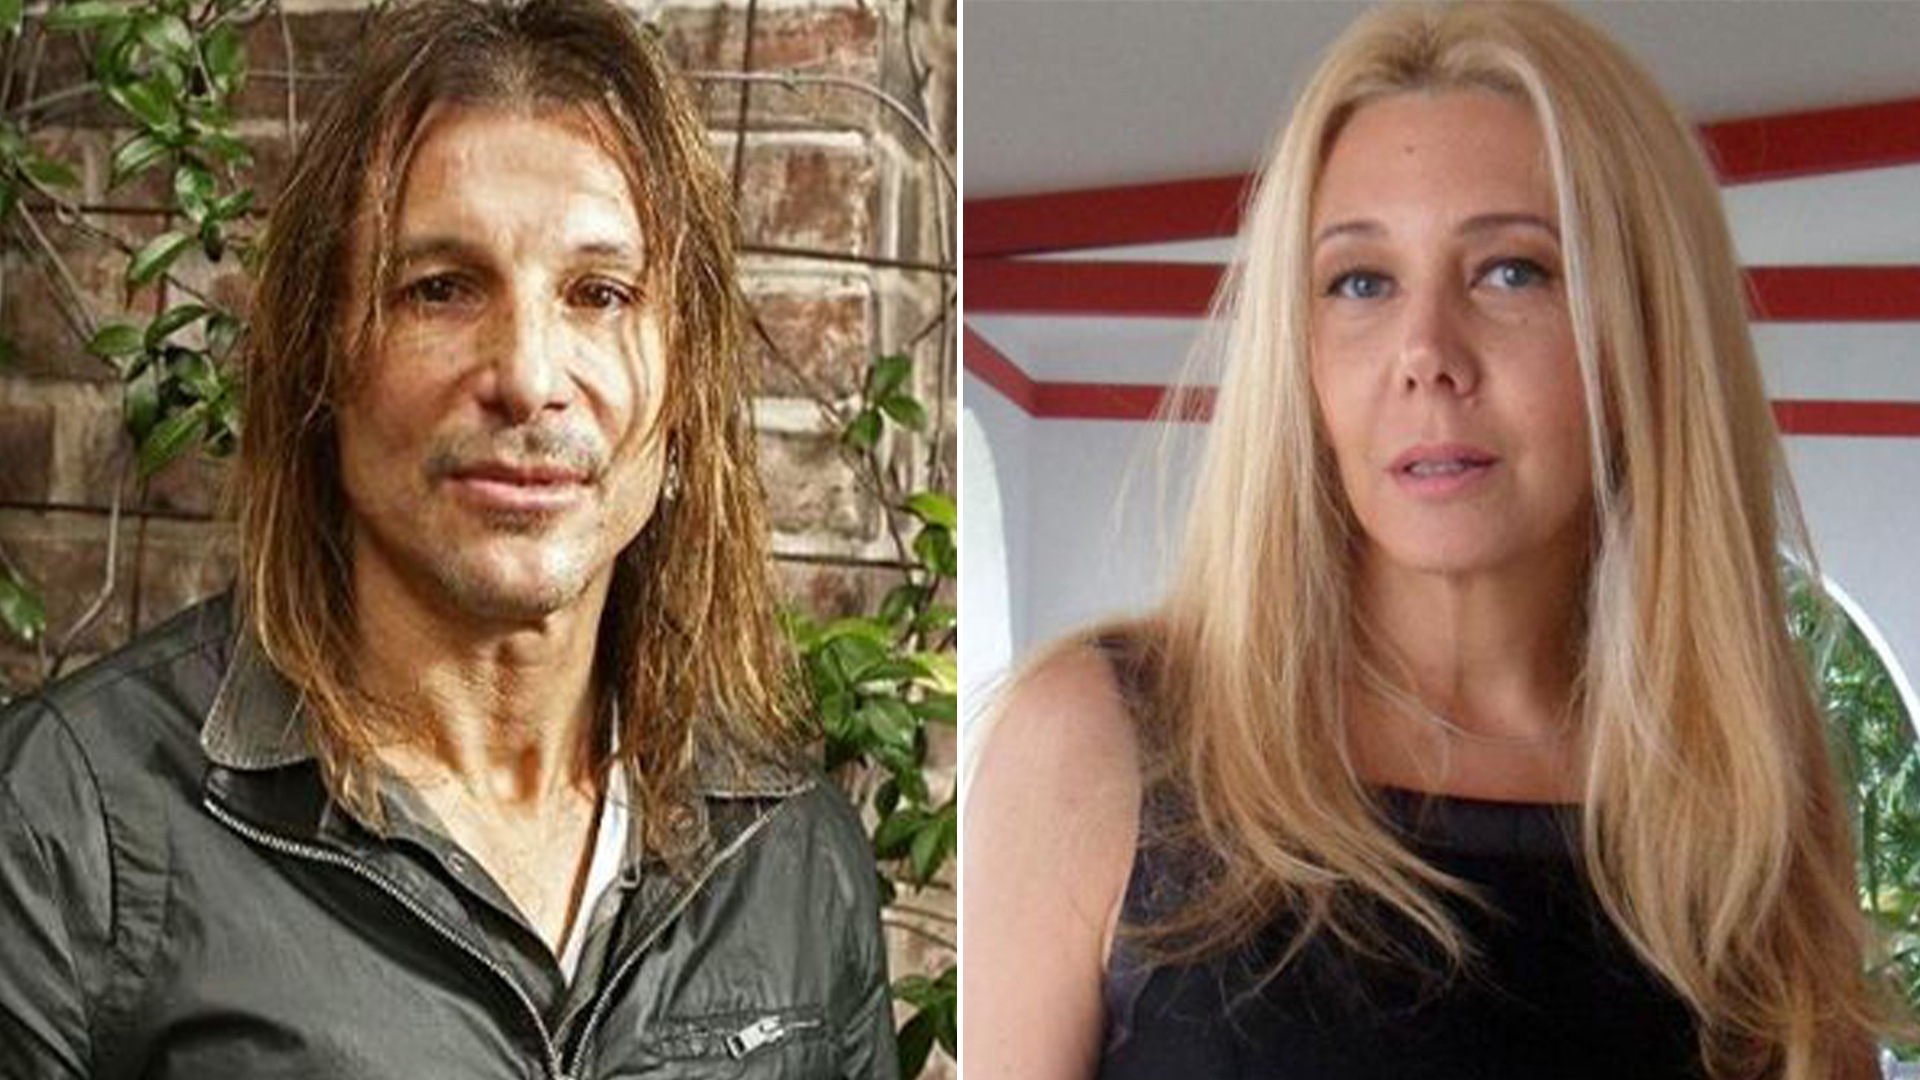 Claudio Caniggia will be investigated today as part of the complaint against him for alleged rape of Mariana Nannis